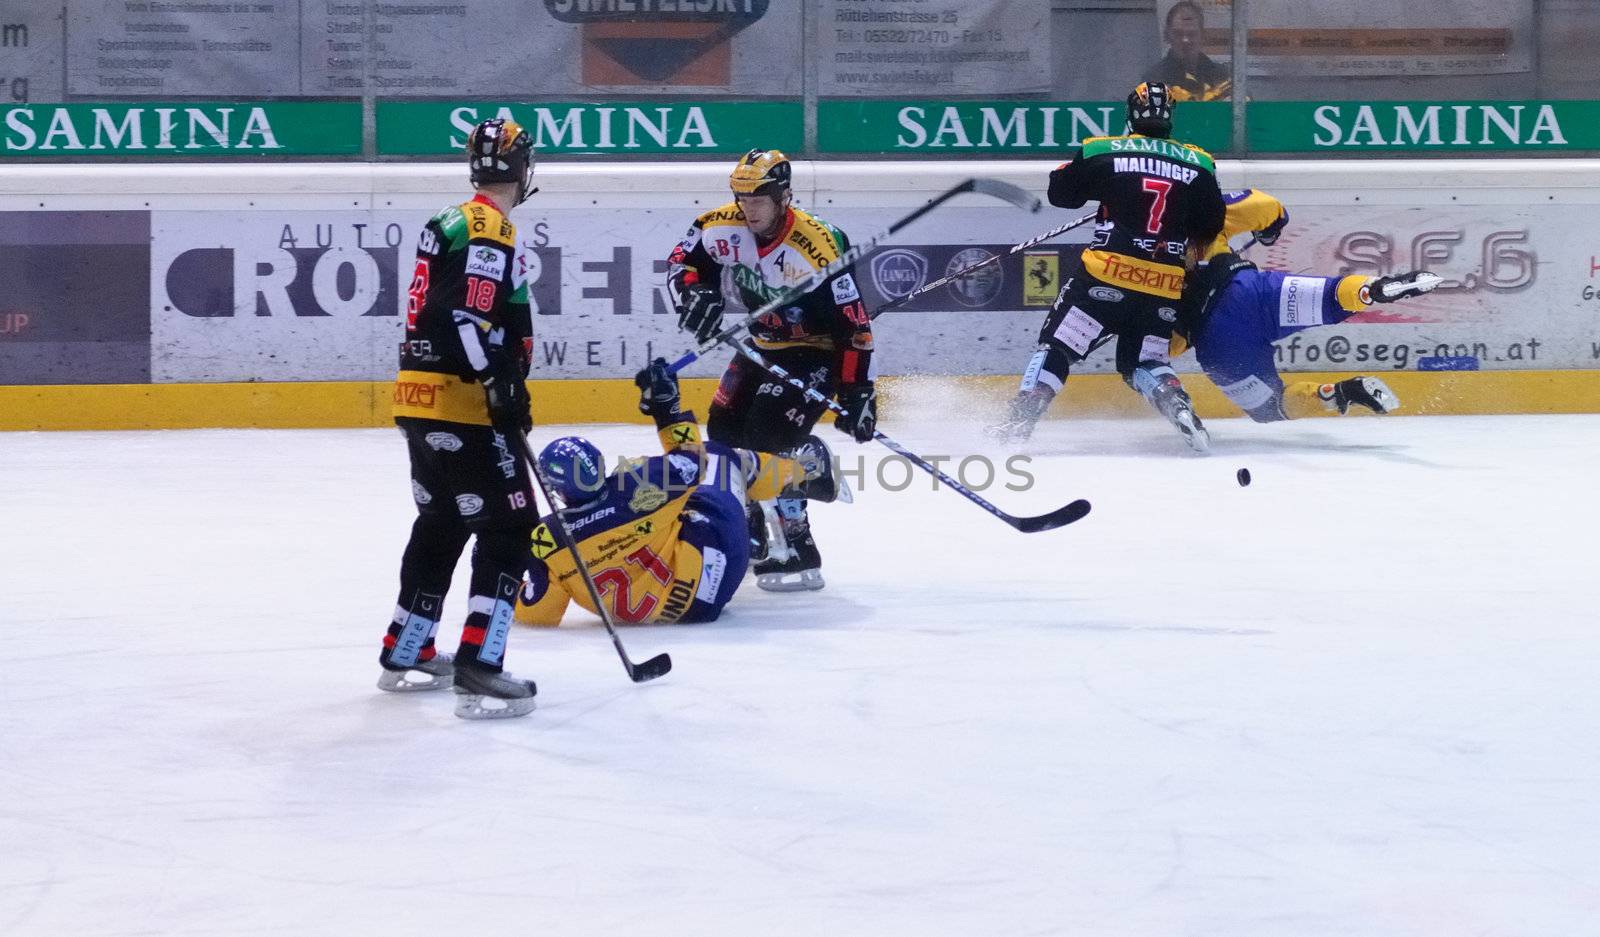 ZELL AM SEE, AUSTRIA - FEB 22: Austrian National League. Game gets chippy as the score is out of hand. Game EK Zell am See vs. VEU Feldkirch (Result 3-1) on February 22, 2011 at hockey rink of Zell am See